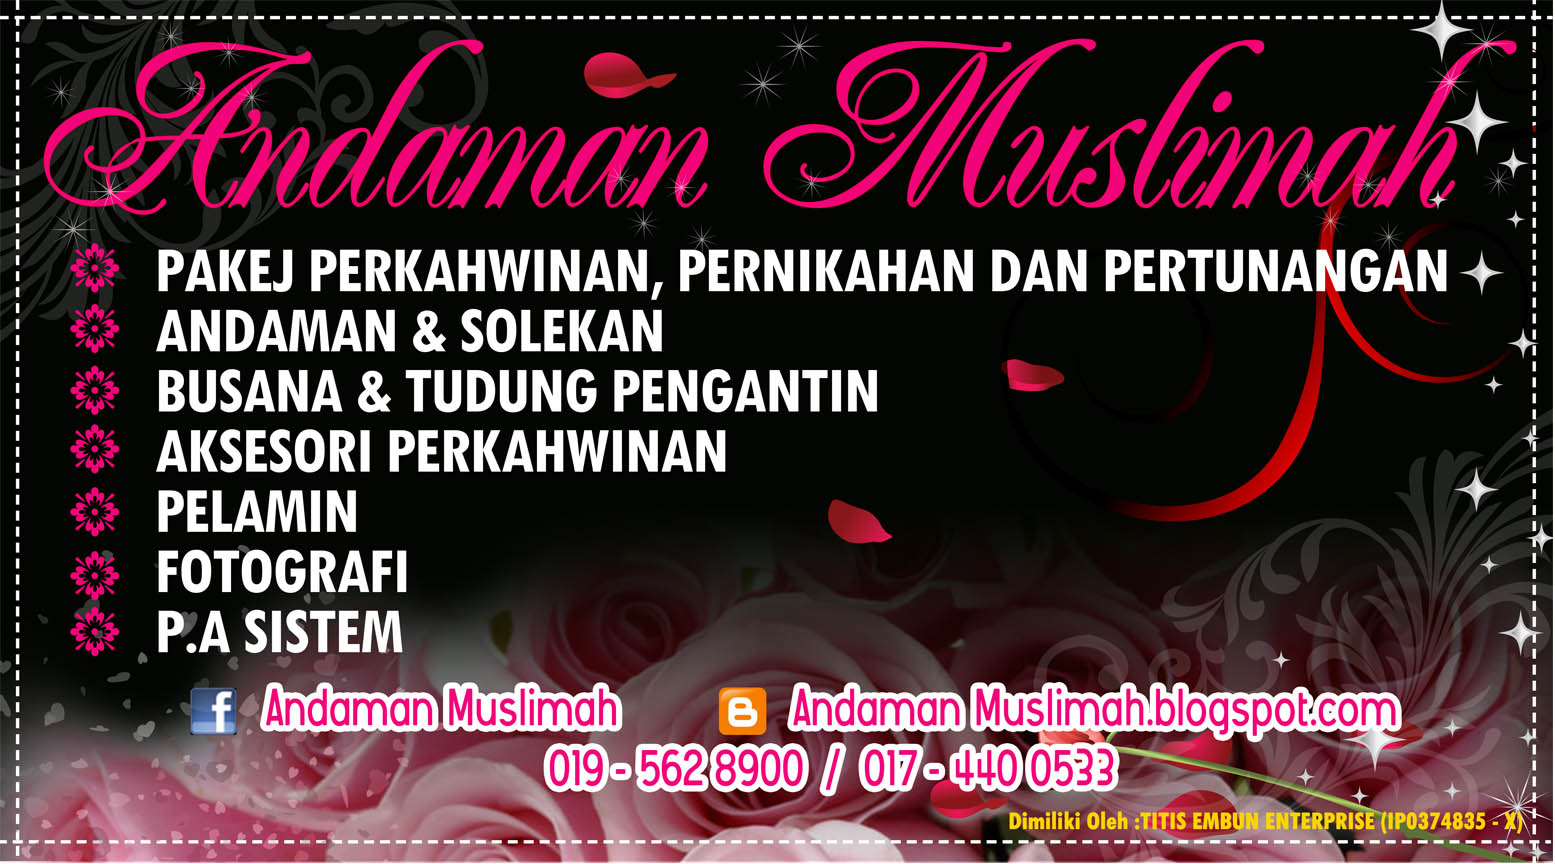 TOUCH BY ANDAMAN MUSLIMAH